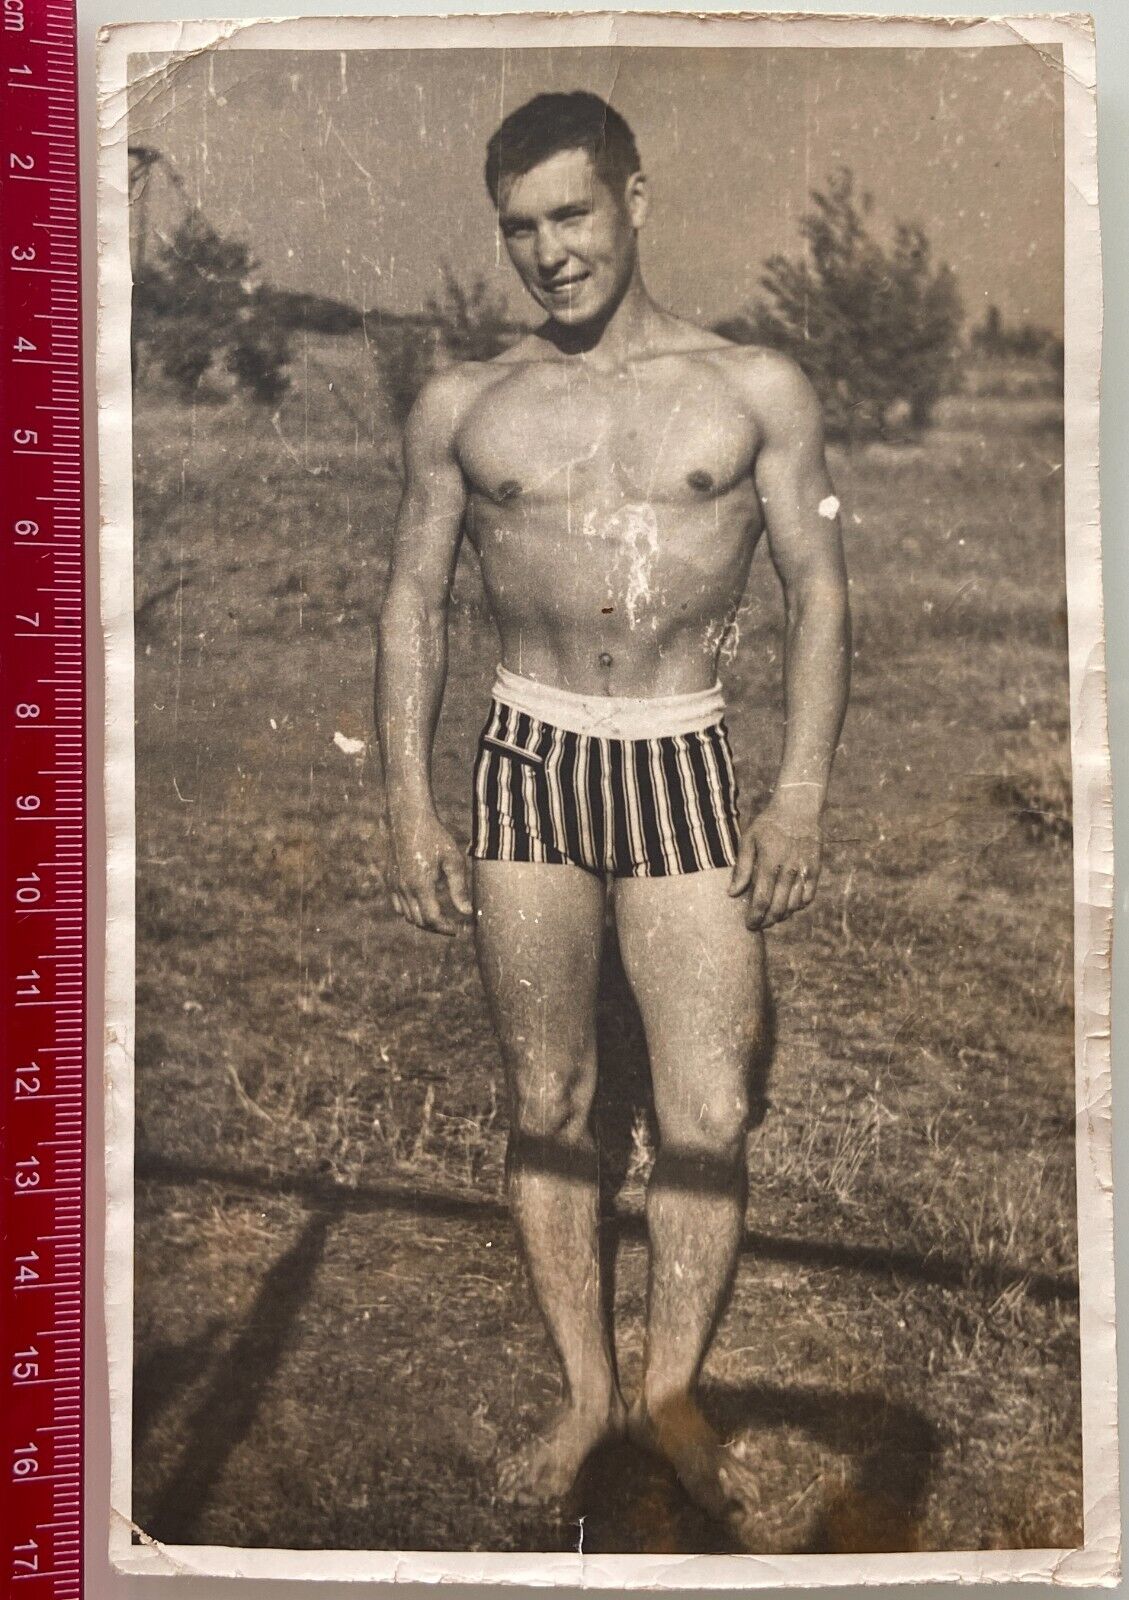 Shirtless Man Beefcake Handsome Young Guy Muscle Gay Interest Vintage Photo